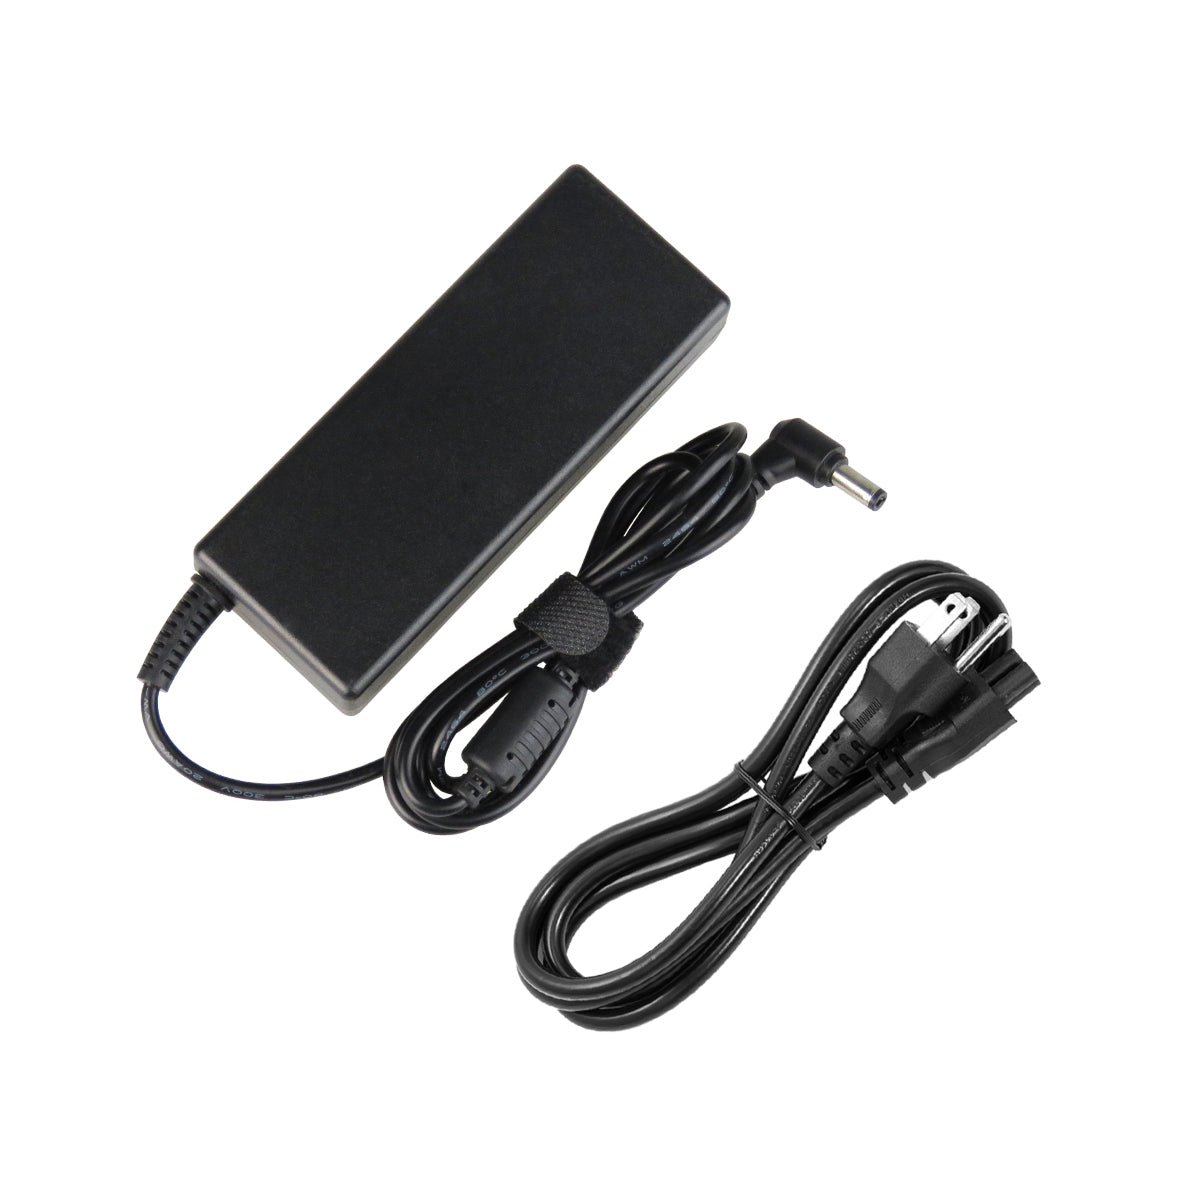 AC Adapter Charger for Gateway M-6846 Notebook.